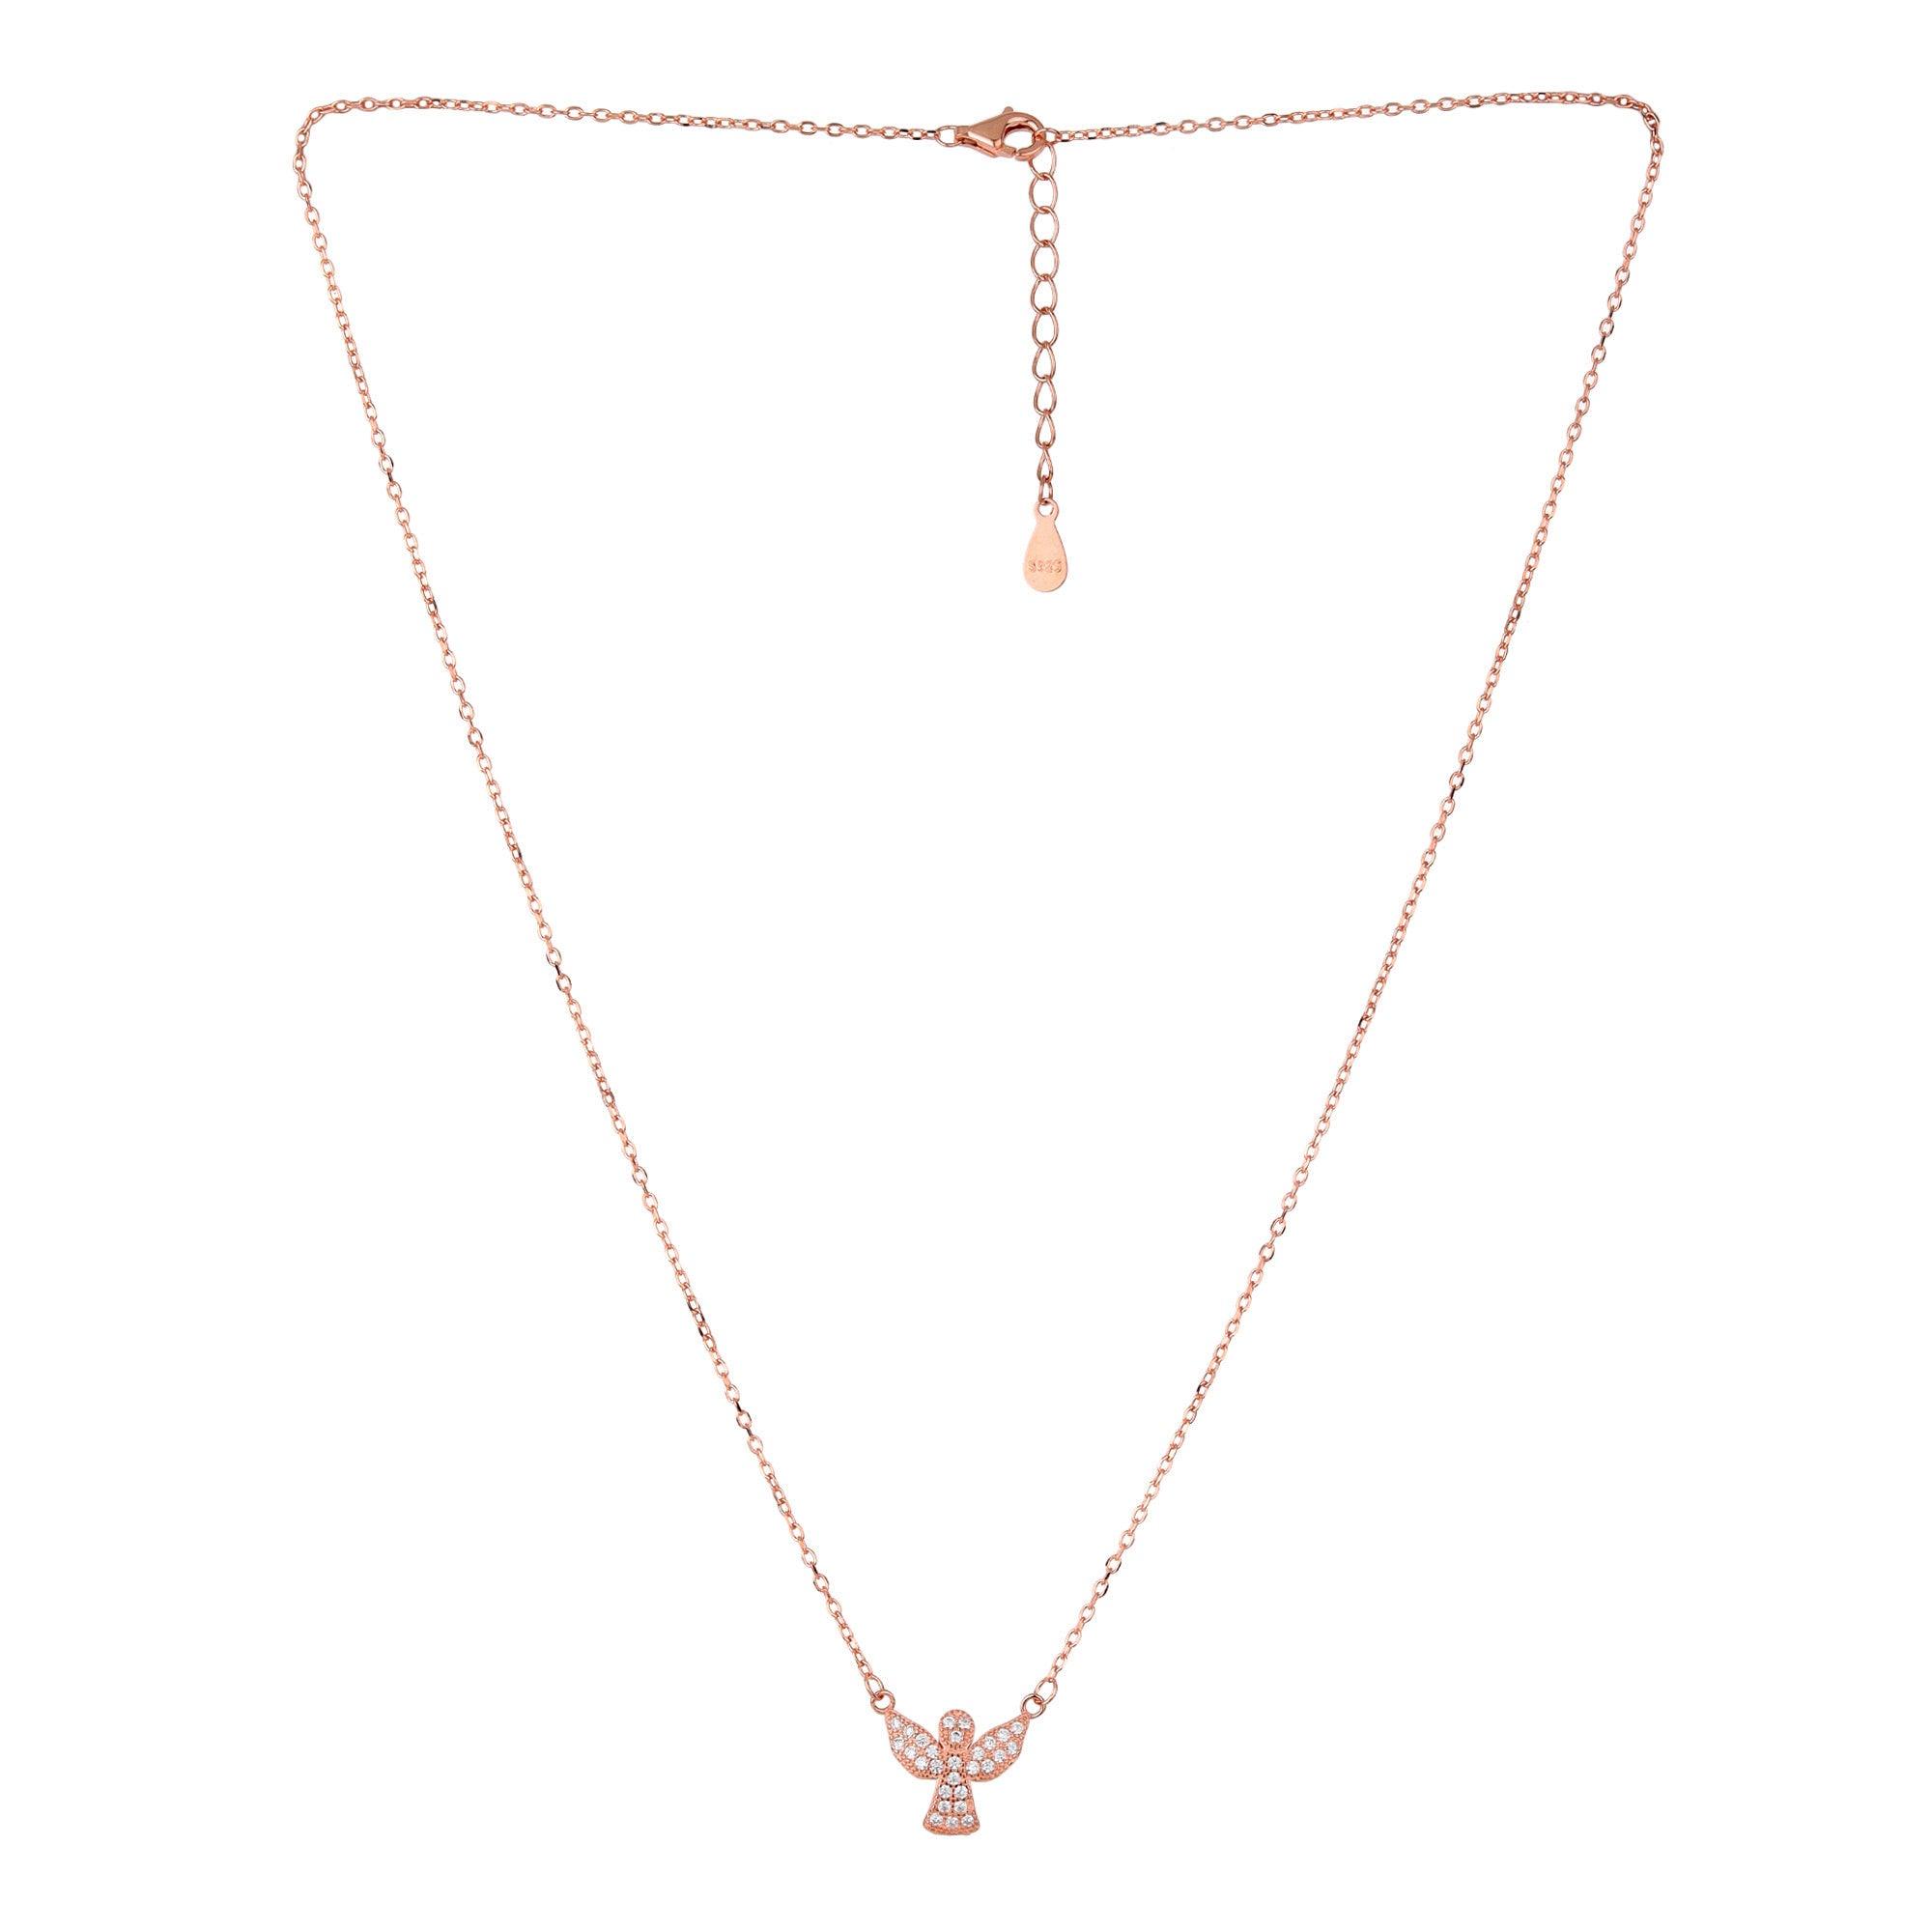 Rose Gold Toned Silver Angel Pendant - silvermark